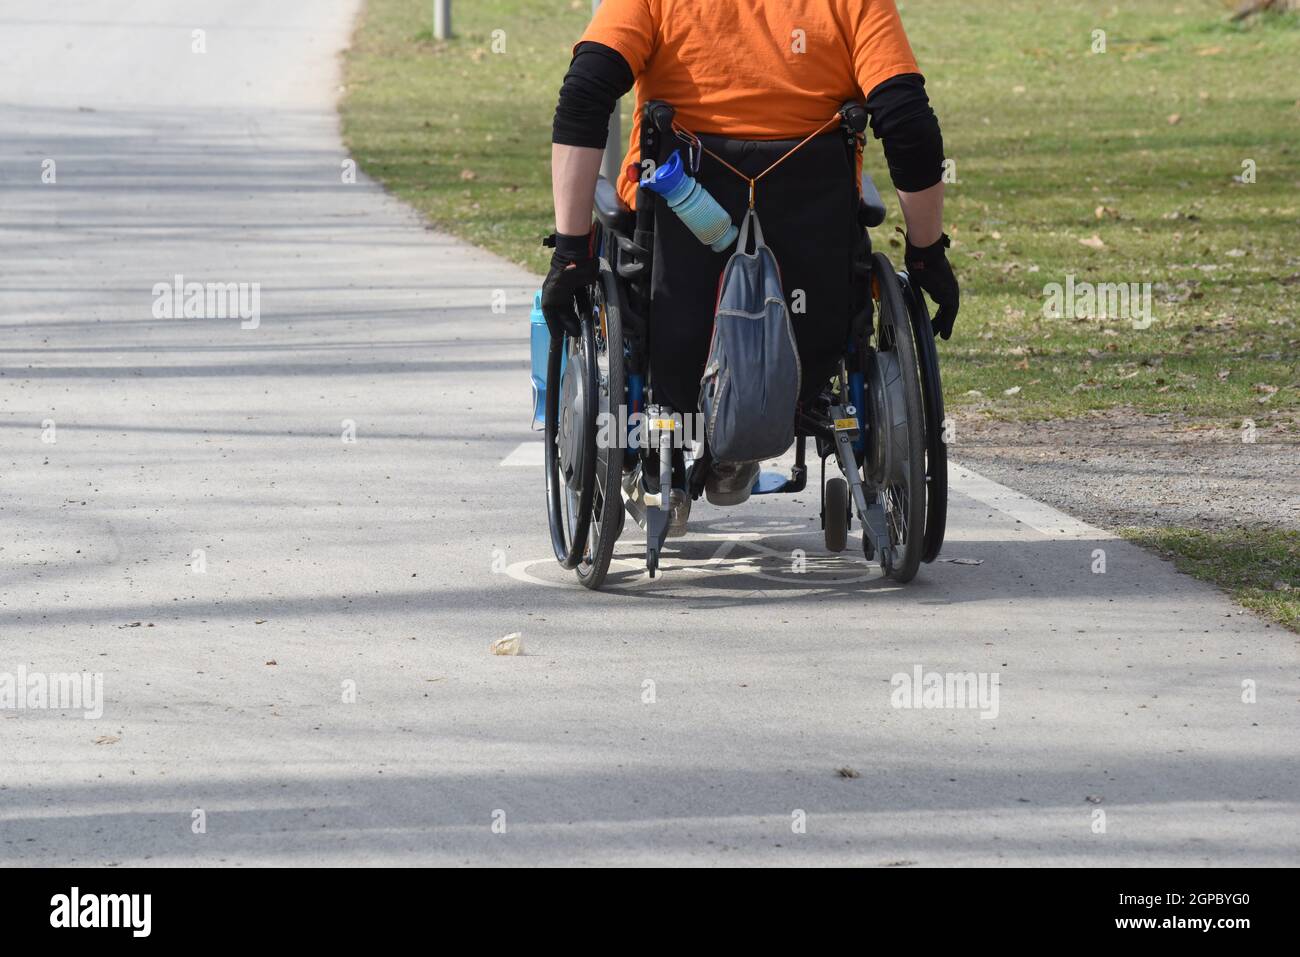 barrier free access and mobility in daily life for wheelchair users Stock Photo